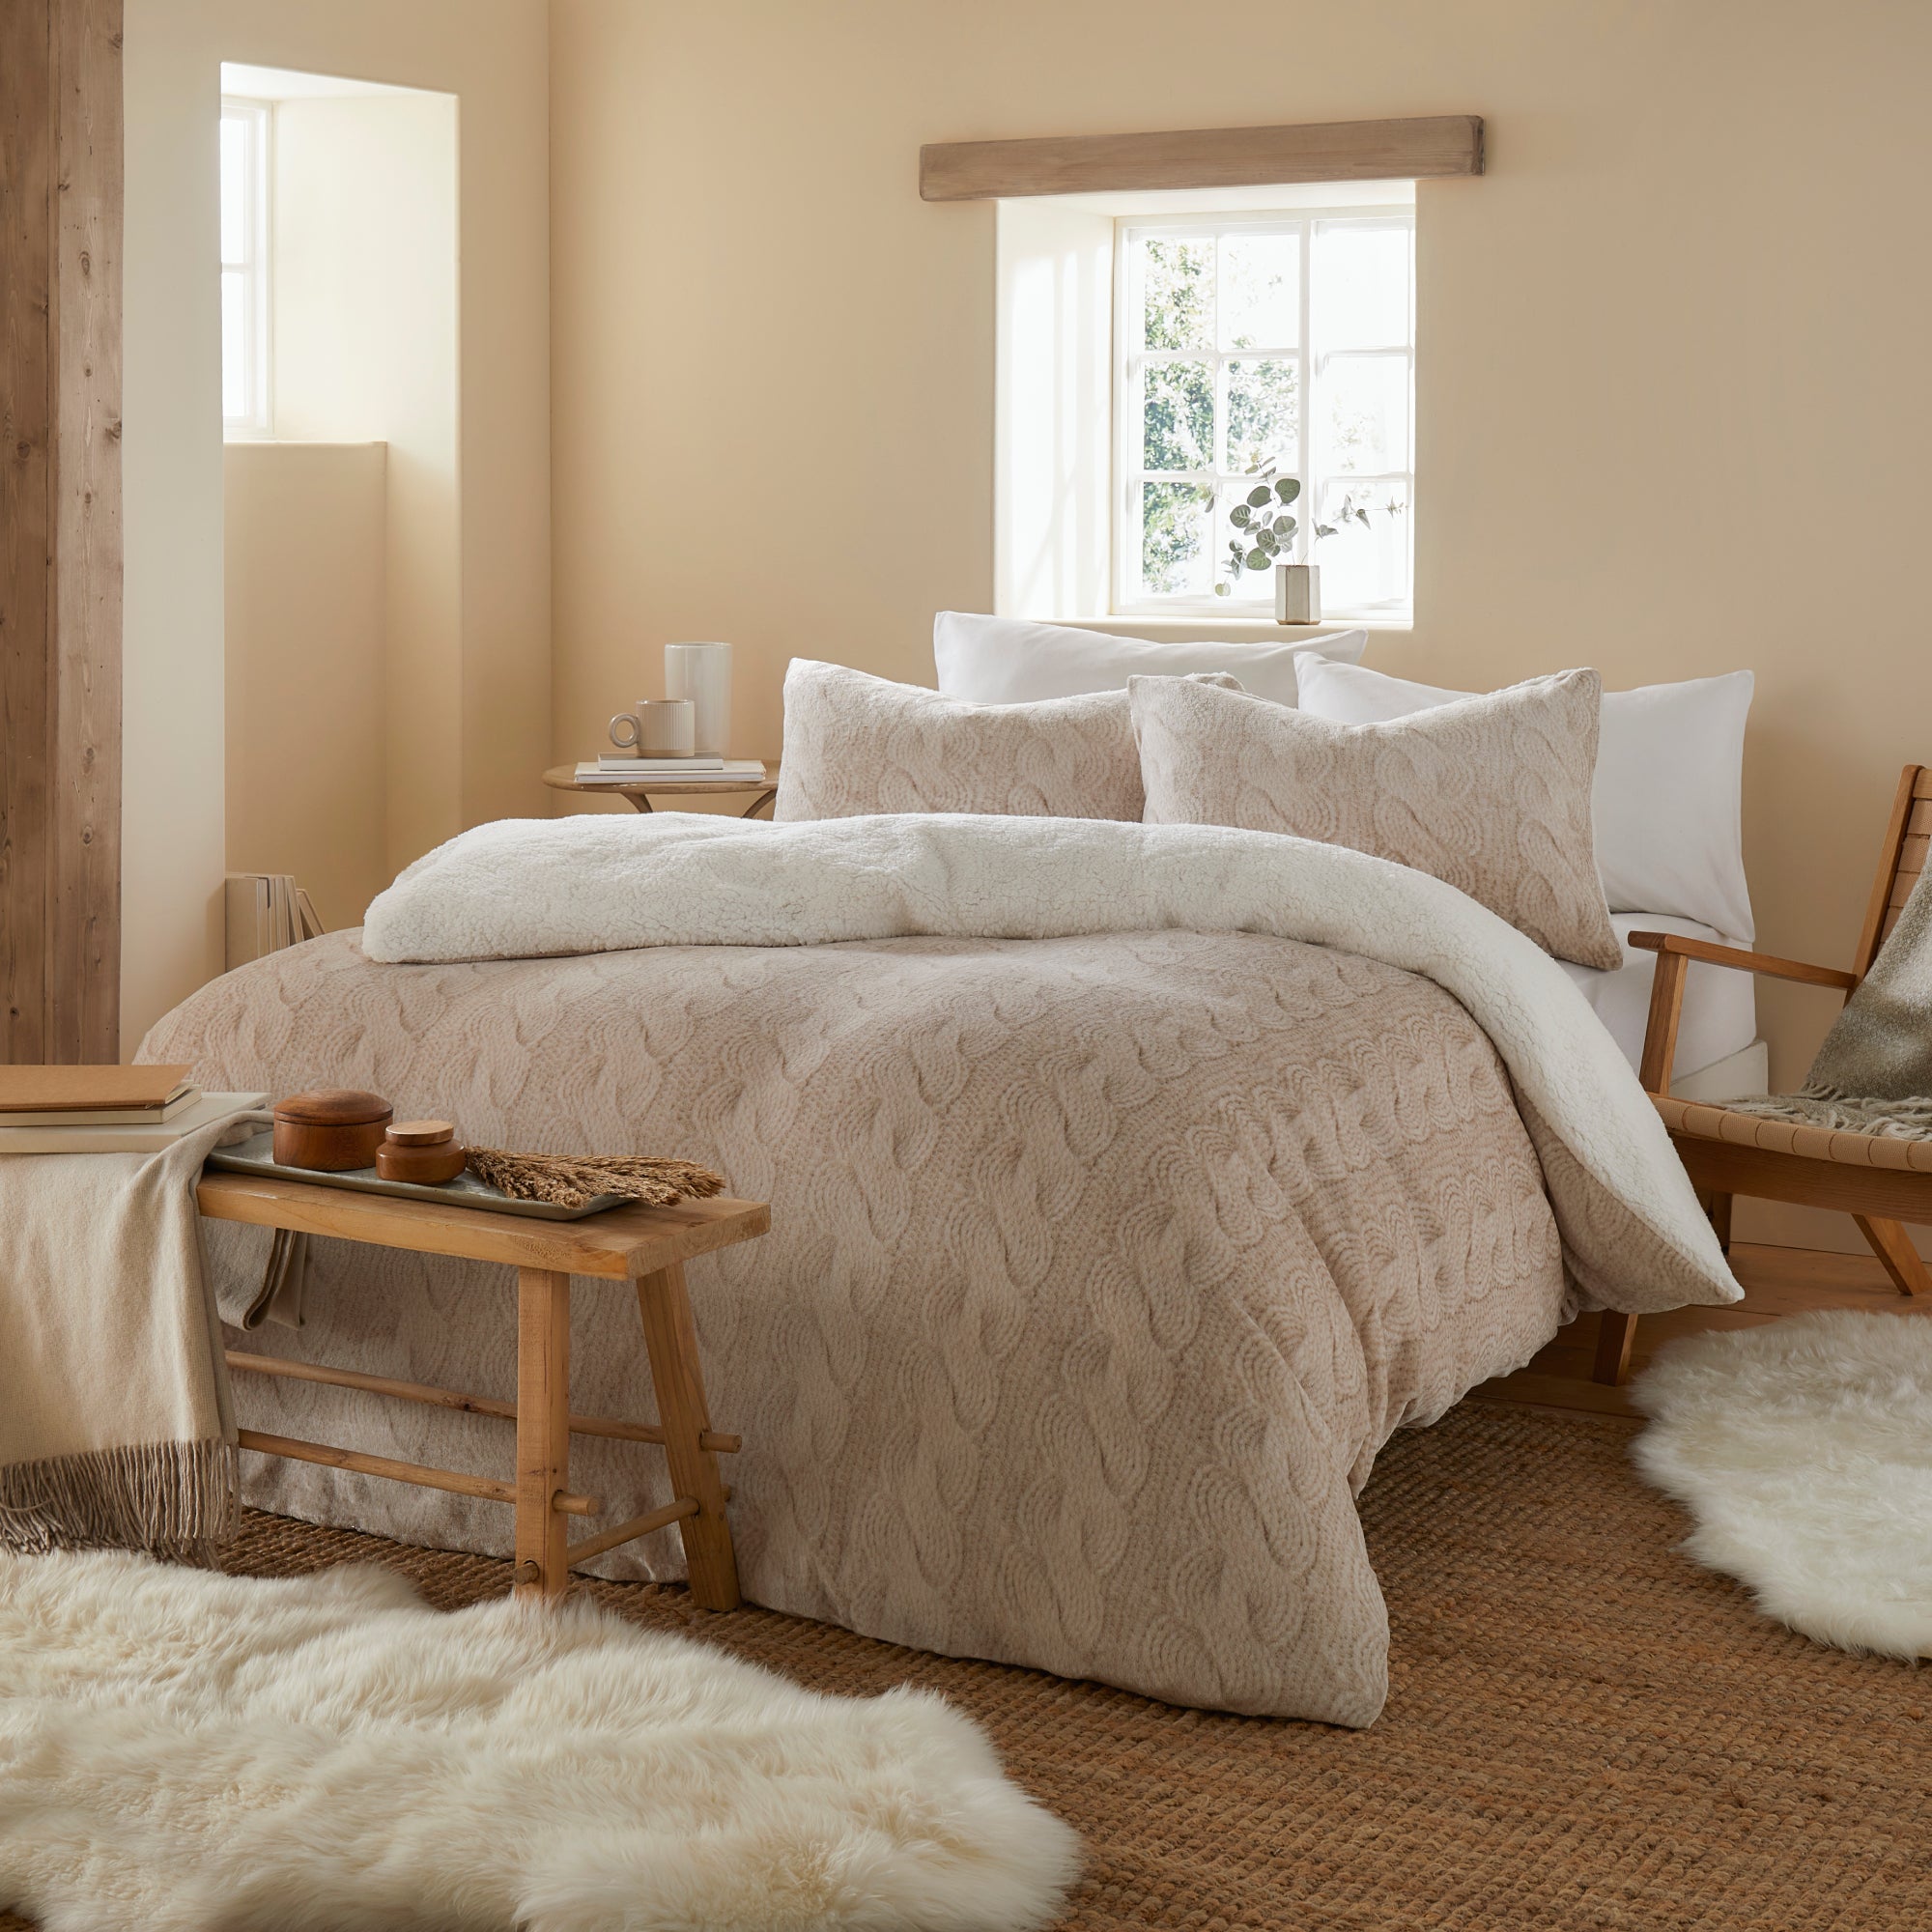 Duvet Cover Set Cable Knit by Fusion Snug in Natural